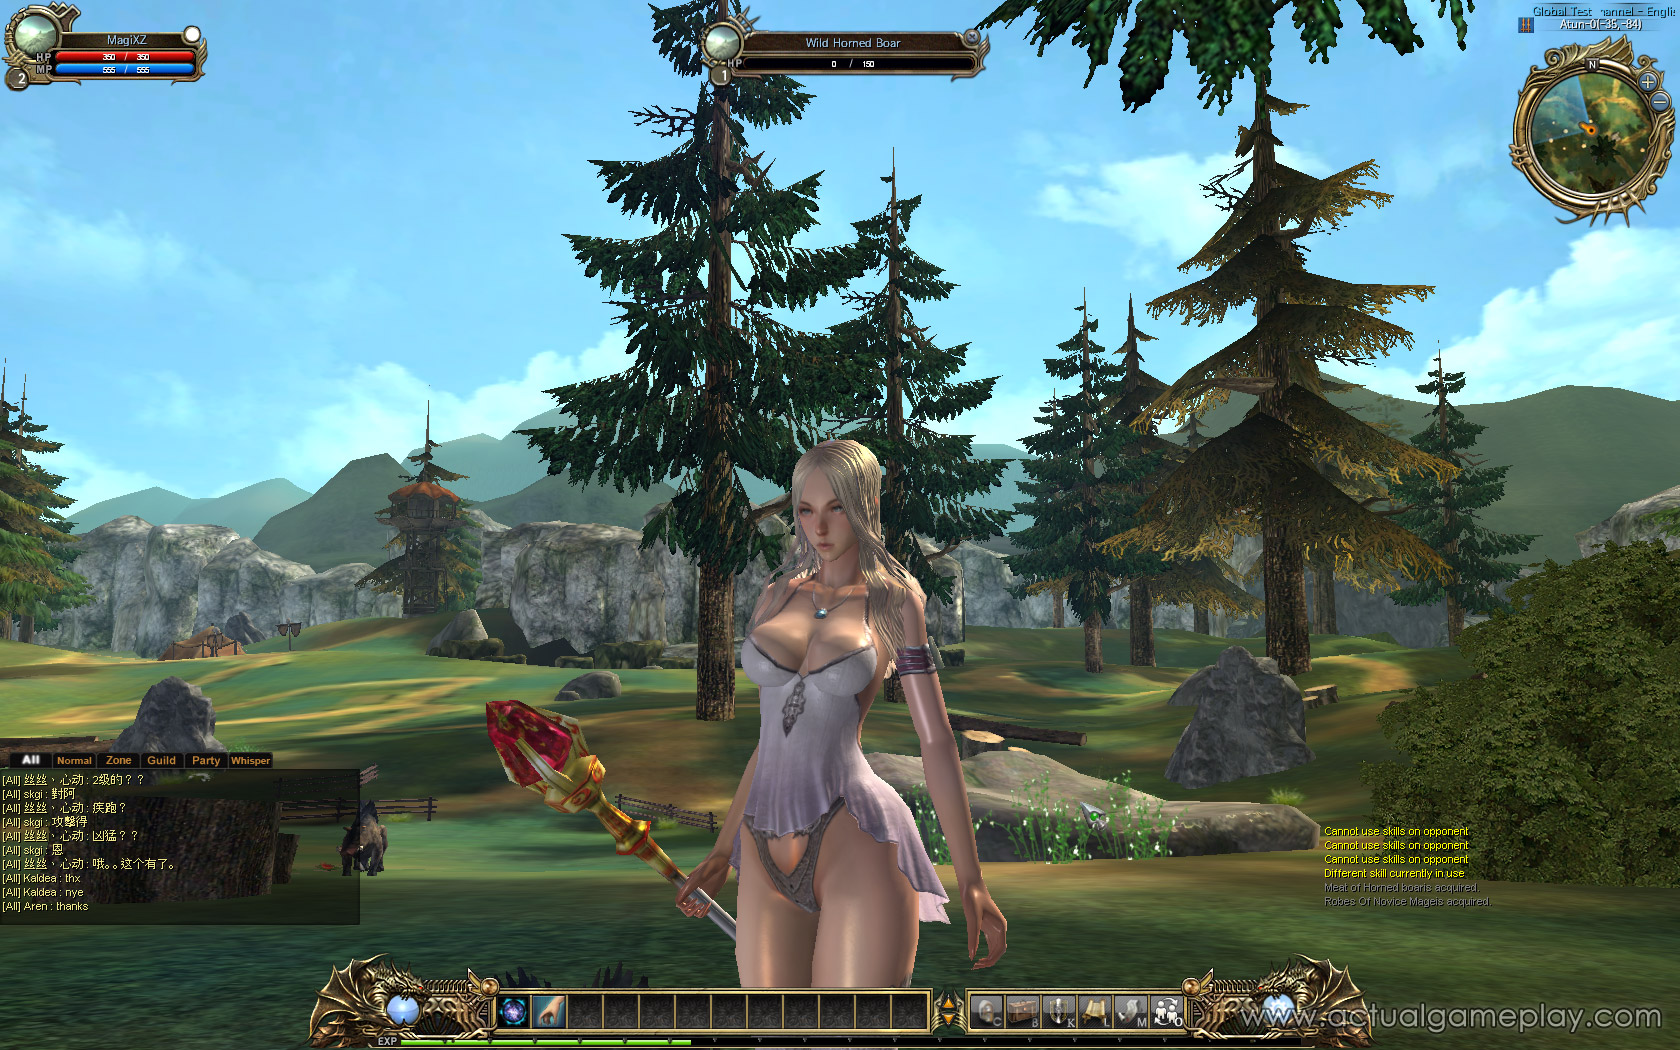 Free Online Adult Mmorpg Games - Adult mmo game | TubeZZZ Porn Photos